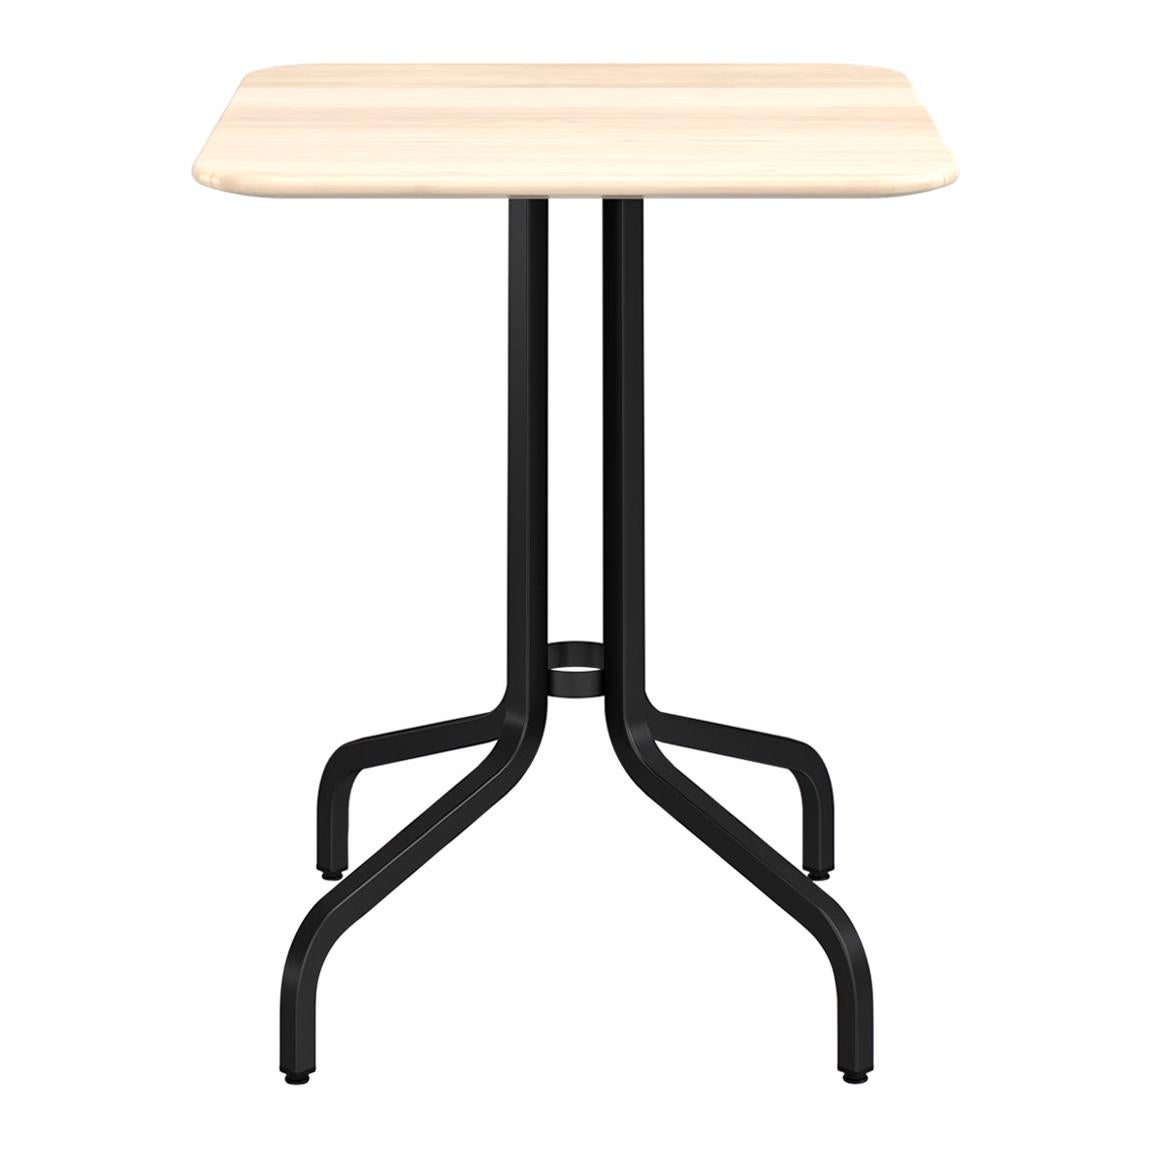 Emeco 1 Inch Small Cafe Table with Black Legs & Wood Top by Jasper Morrison